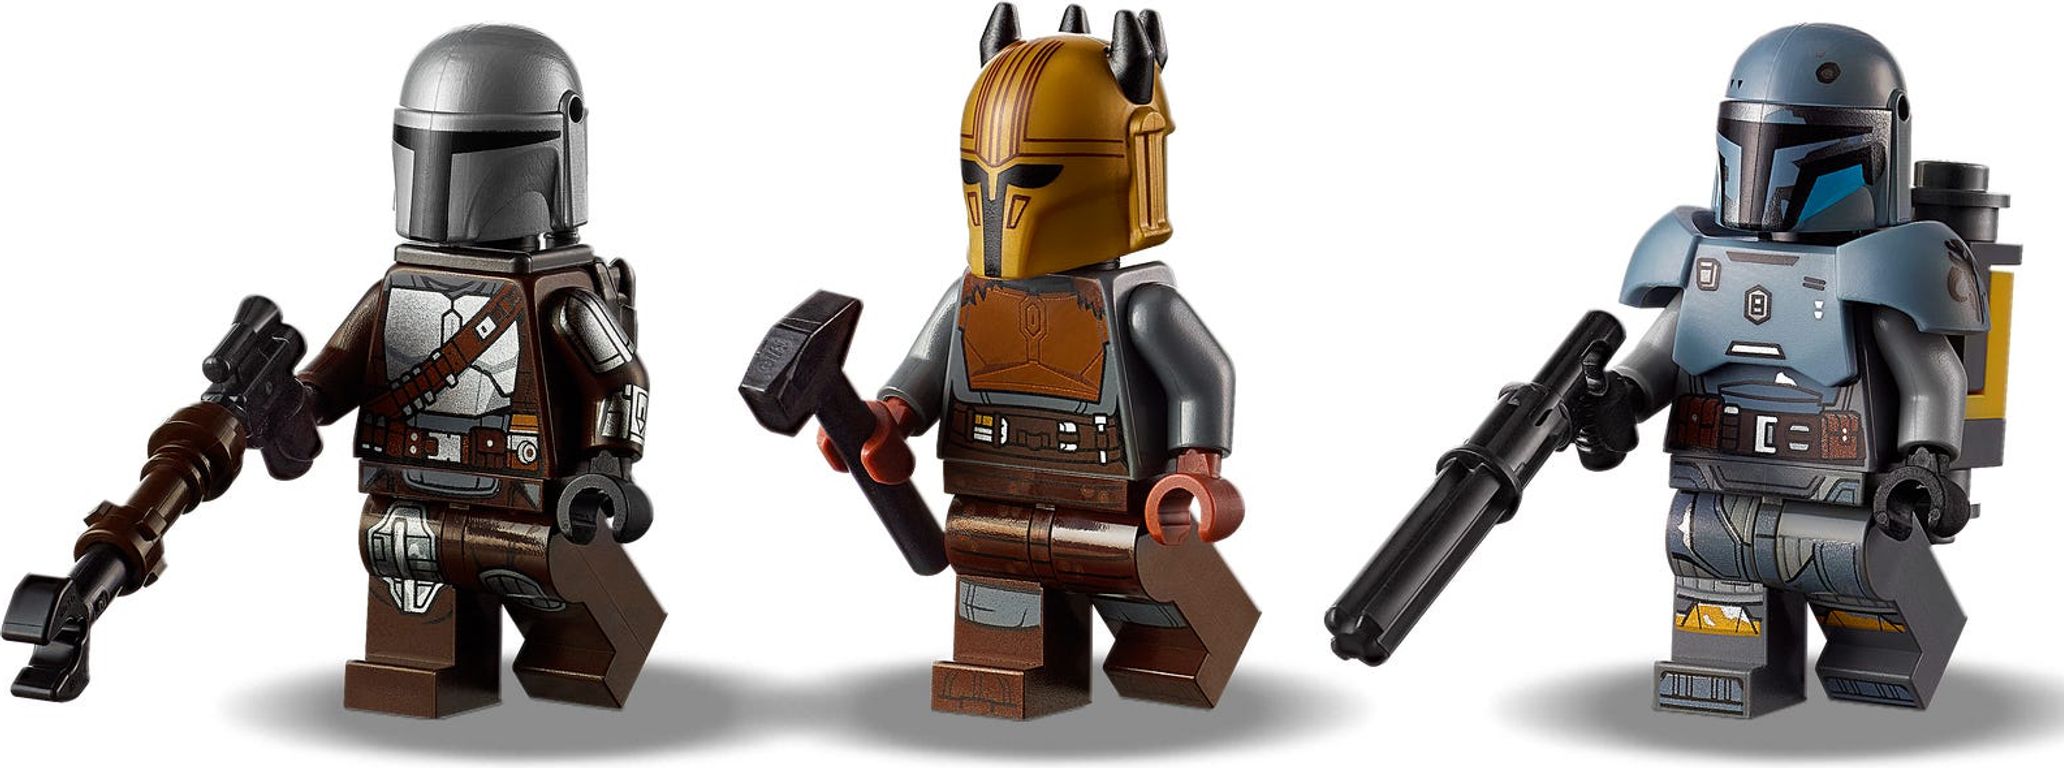 LEGO® Star Wars The Armorer’s Mandalorian™ Forge minifigures